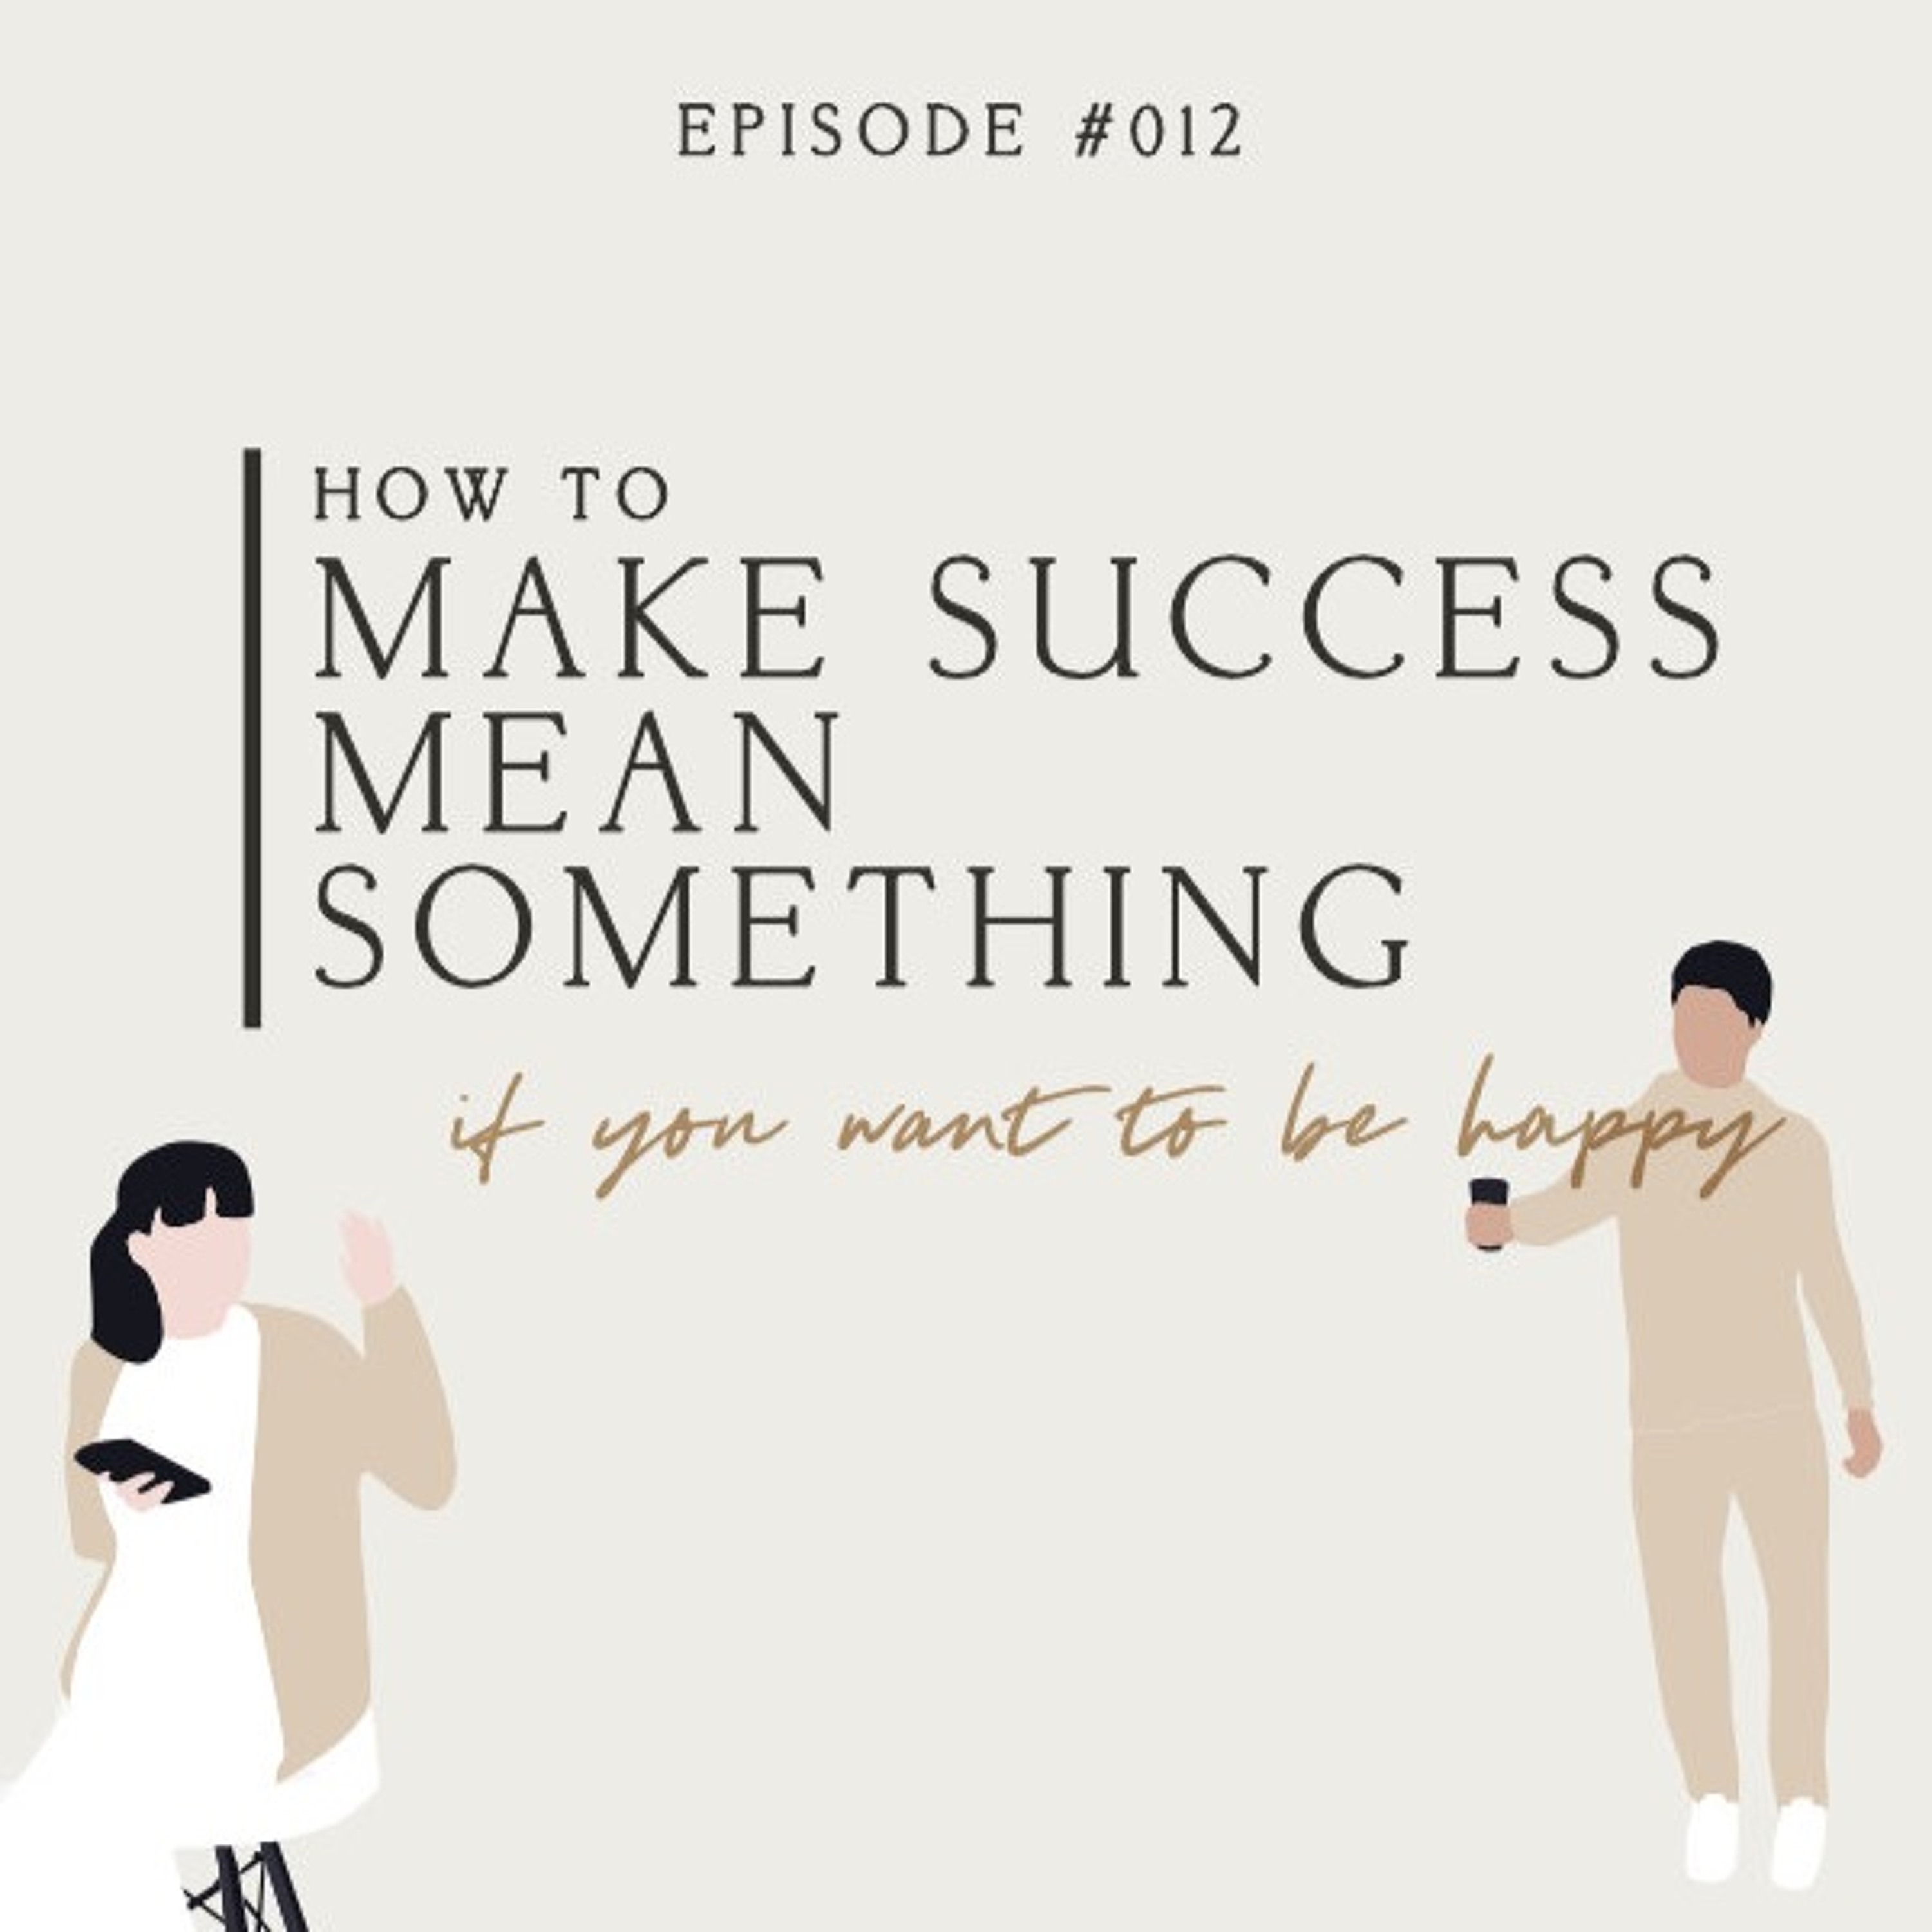 Episode 012 - how to make success mean something